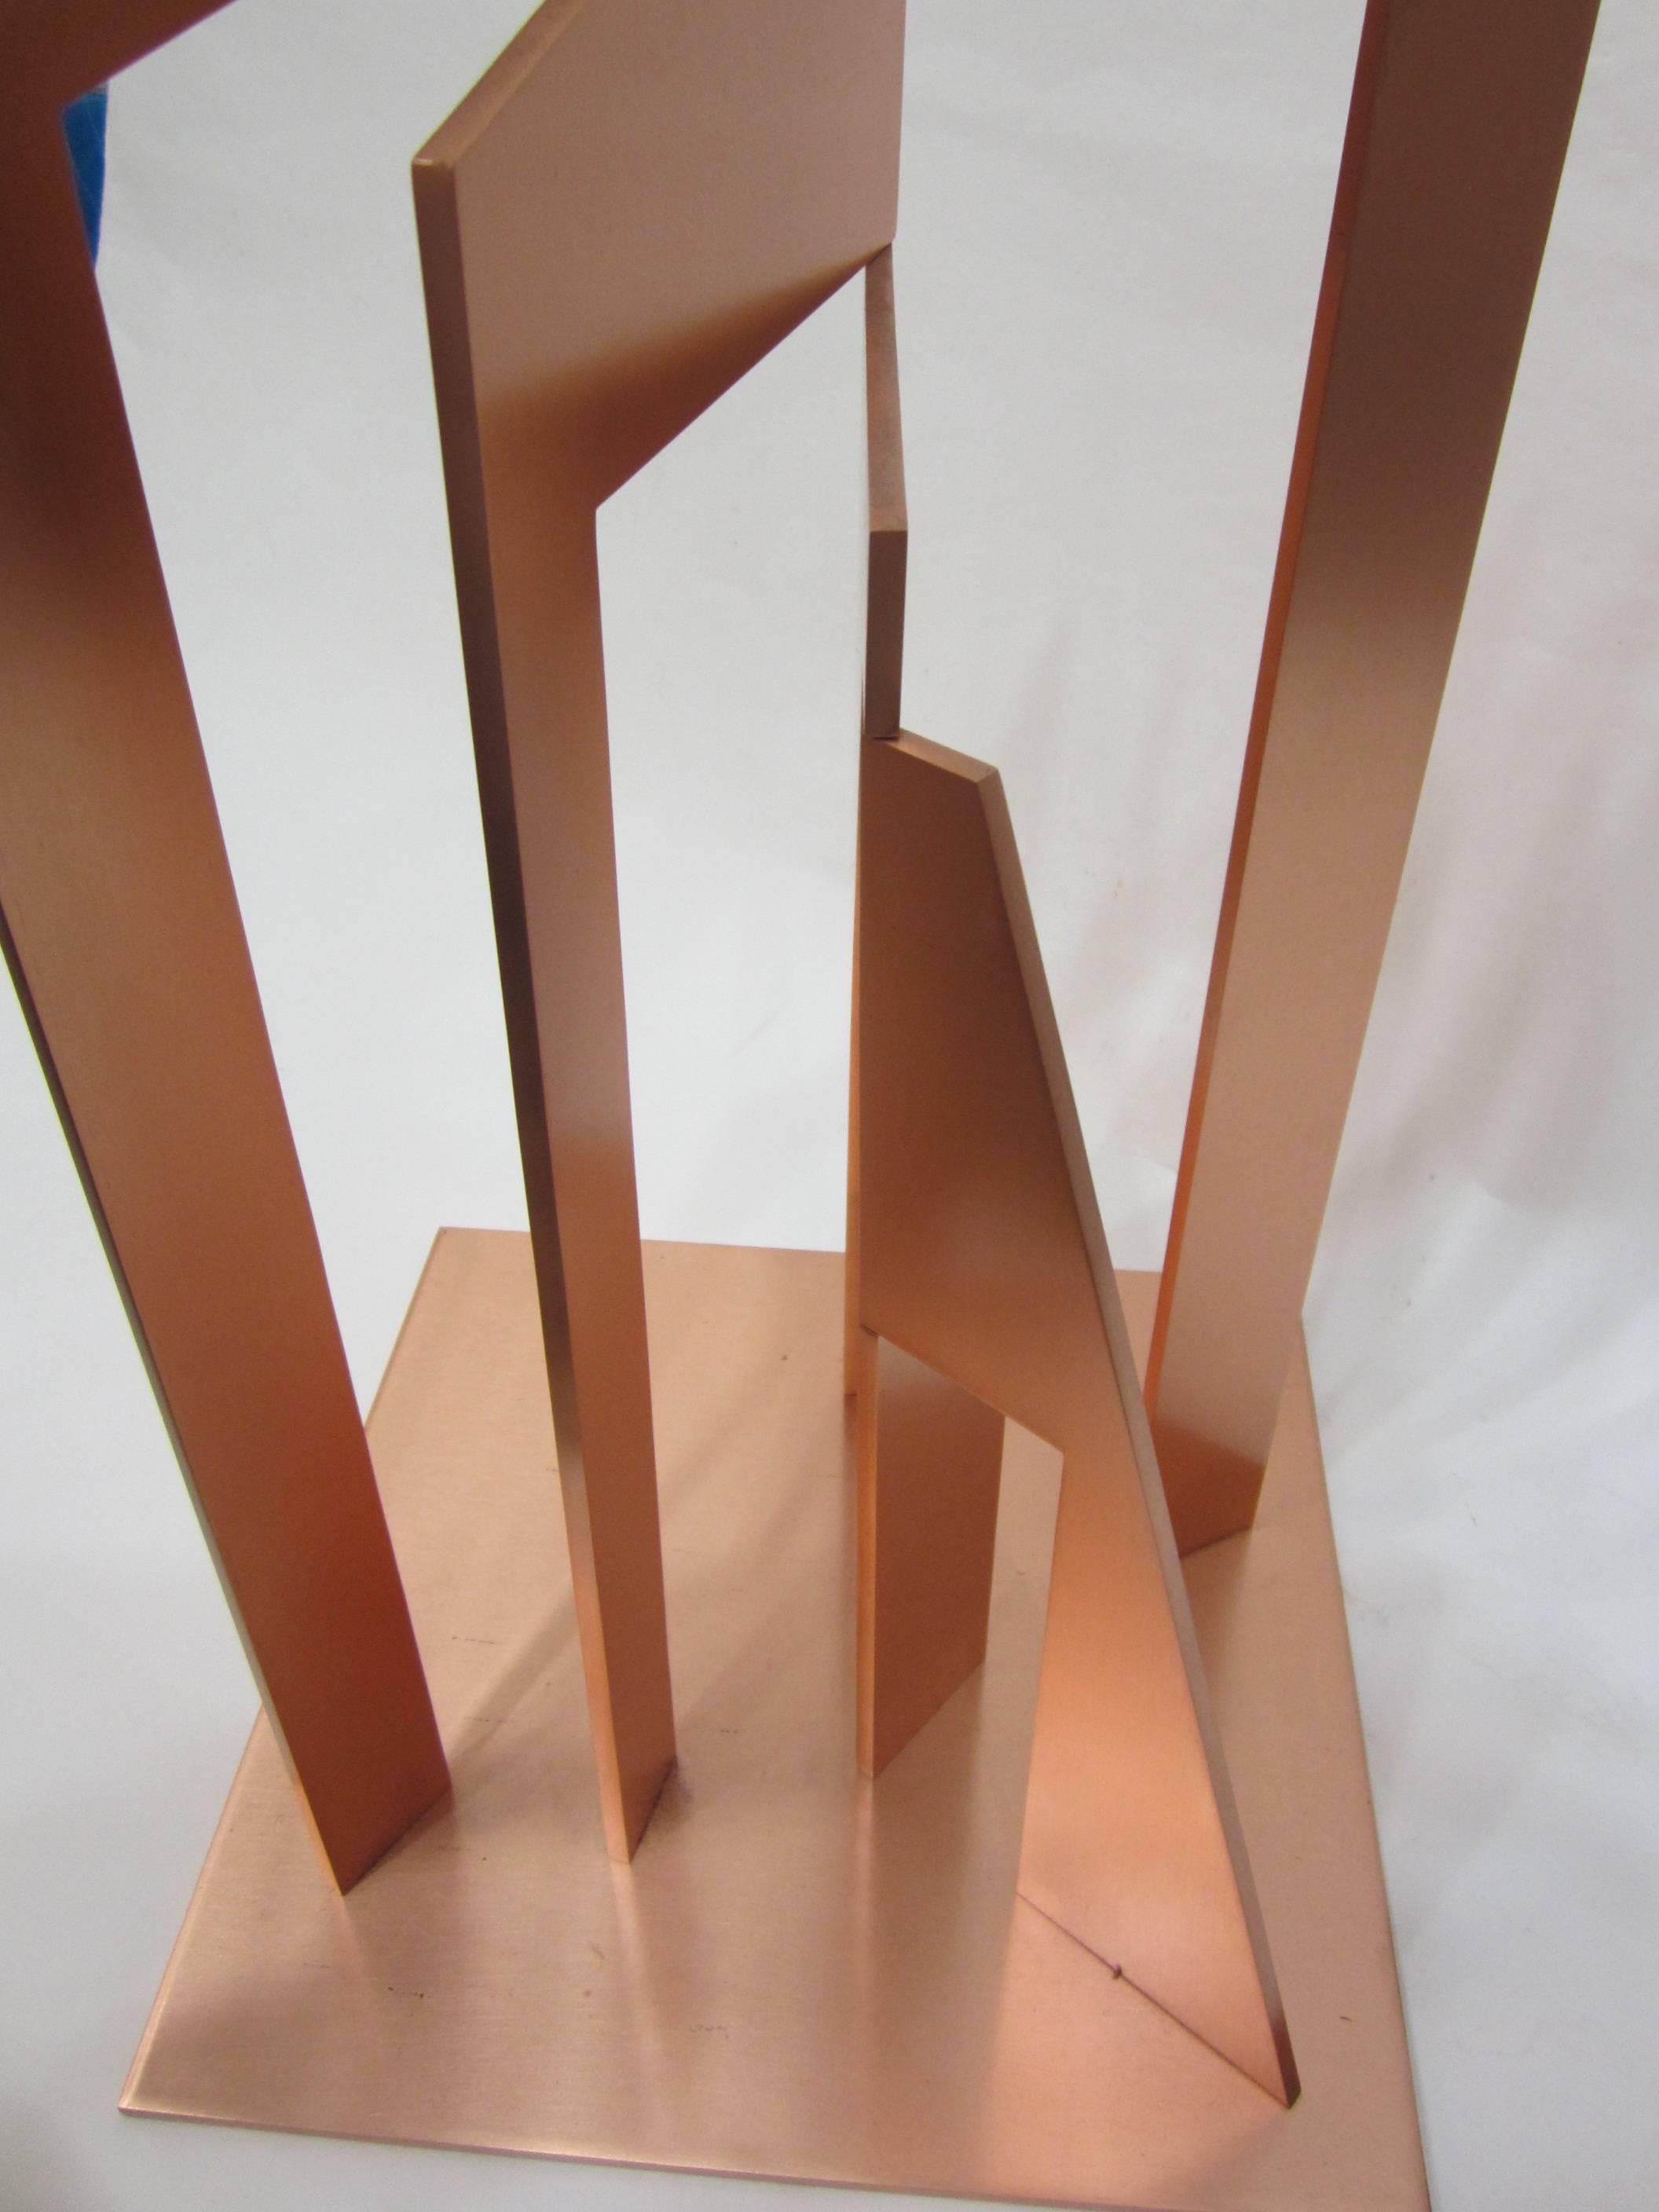 Polished Christopher Georgesco Copper Sculpture Titled 